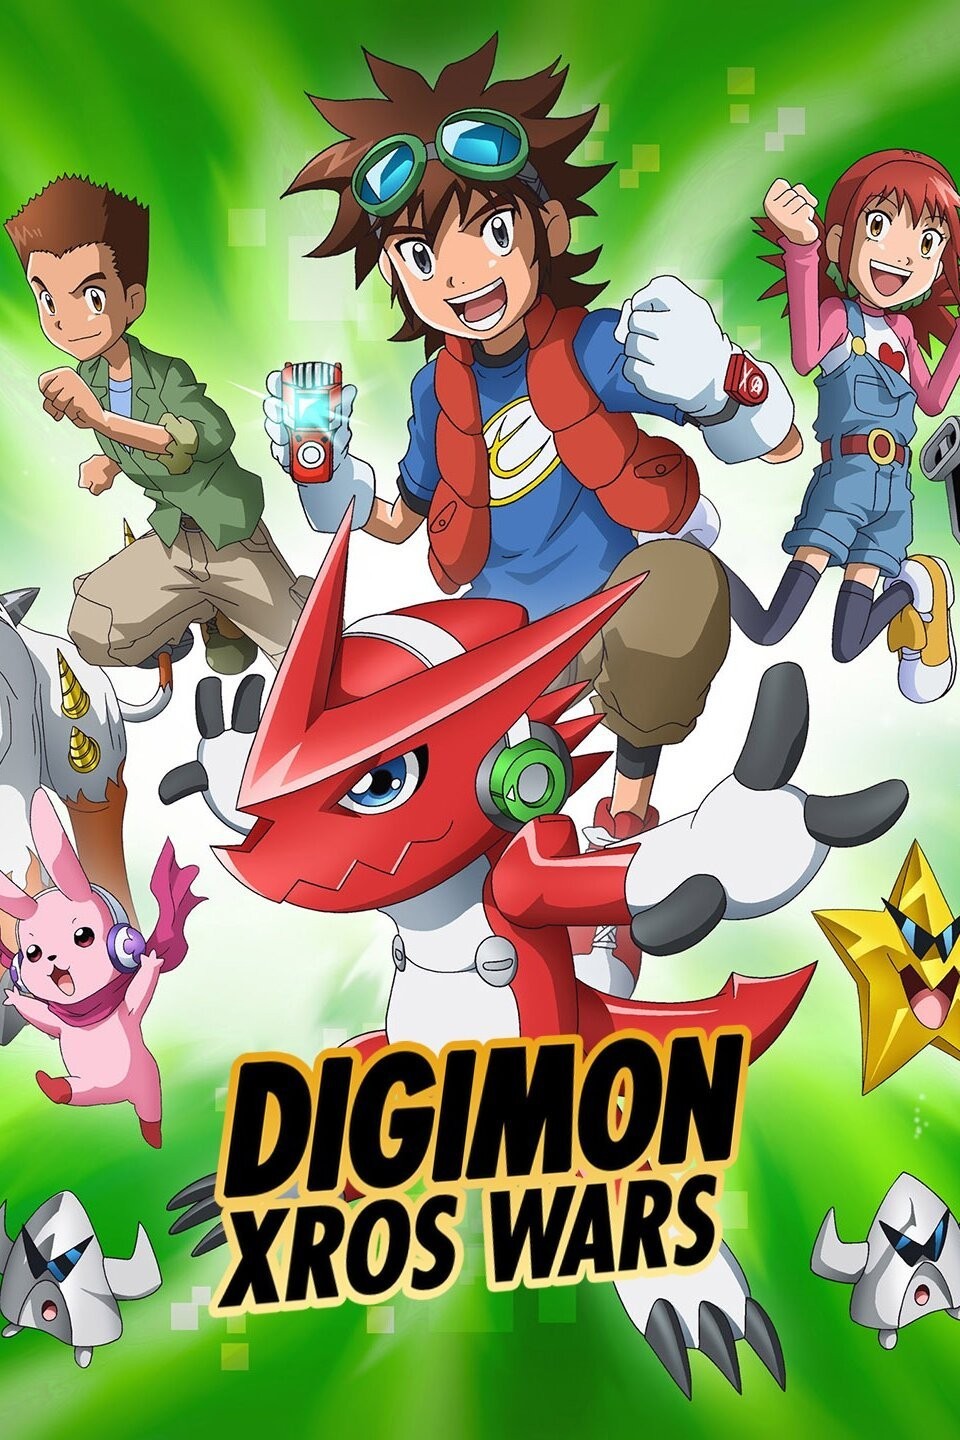 Digimon Anime Is Ending + What Happens Next  Digimon Ghost Game Episode 63  Review 